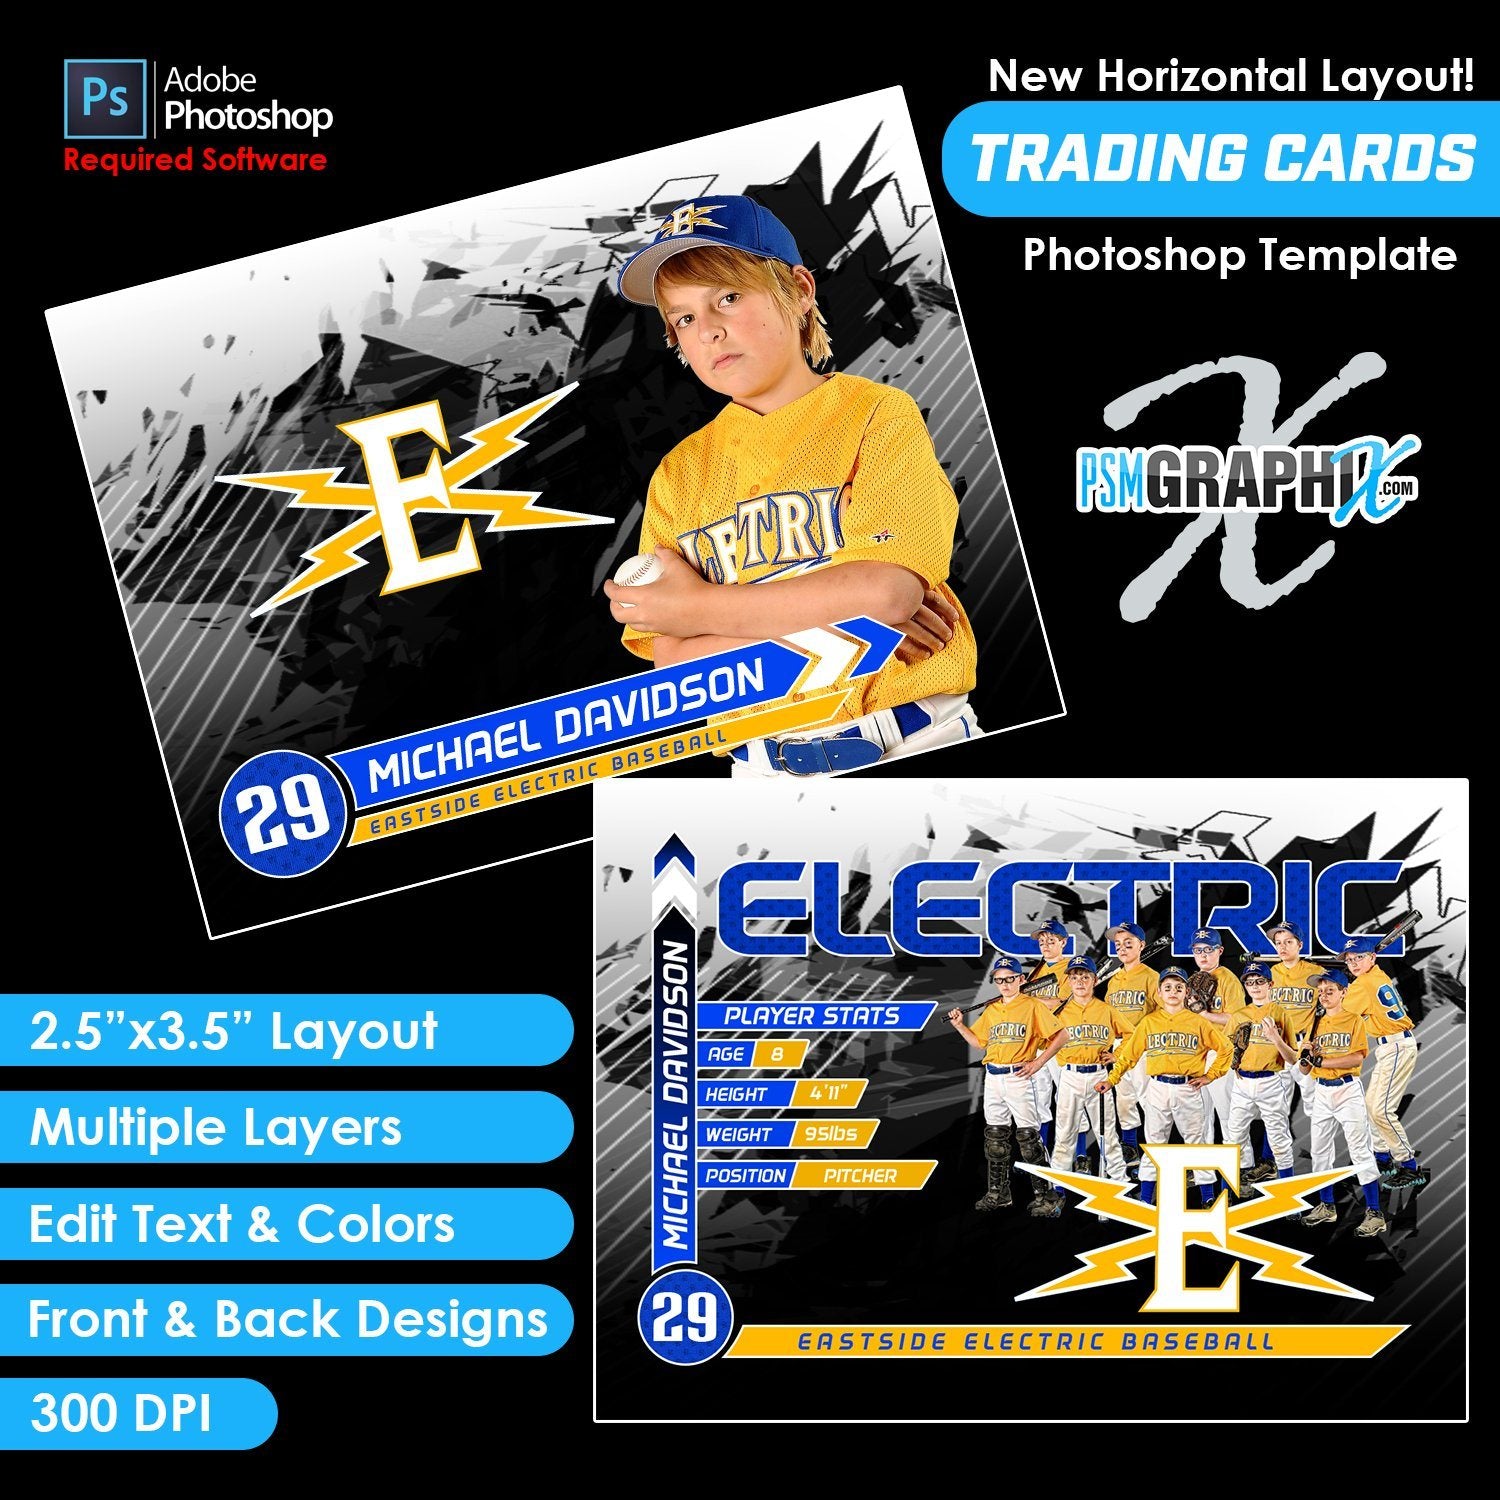 Breaker - V1 - Game Day Trading Card Template-Photoshop Template - PSMGraphix